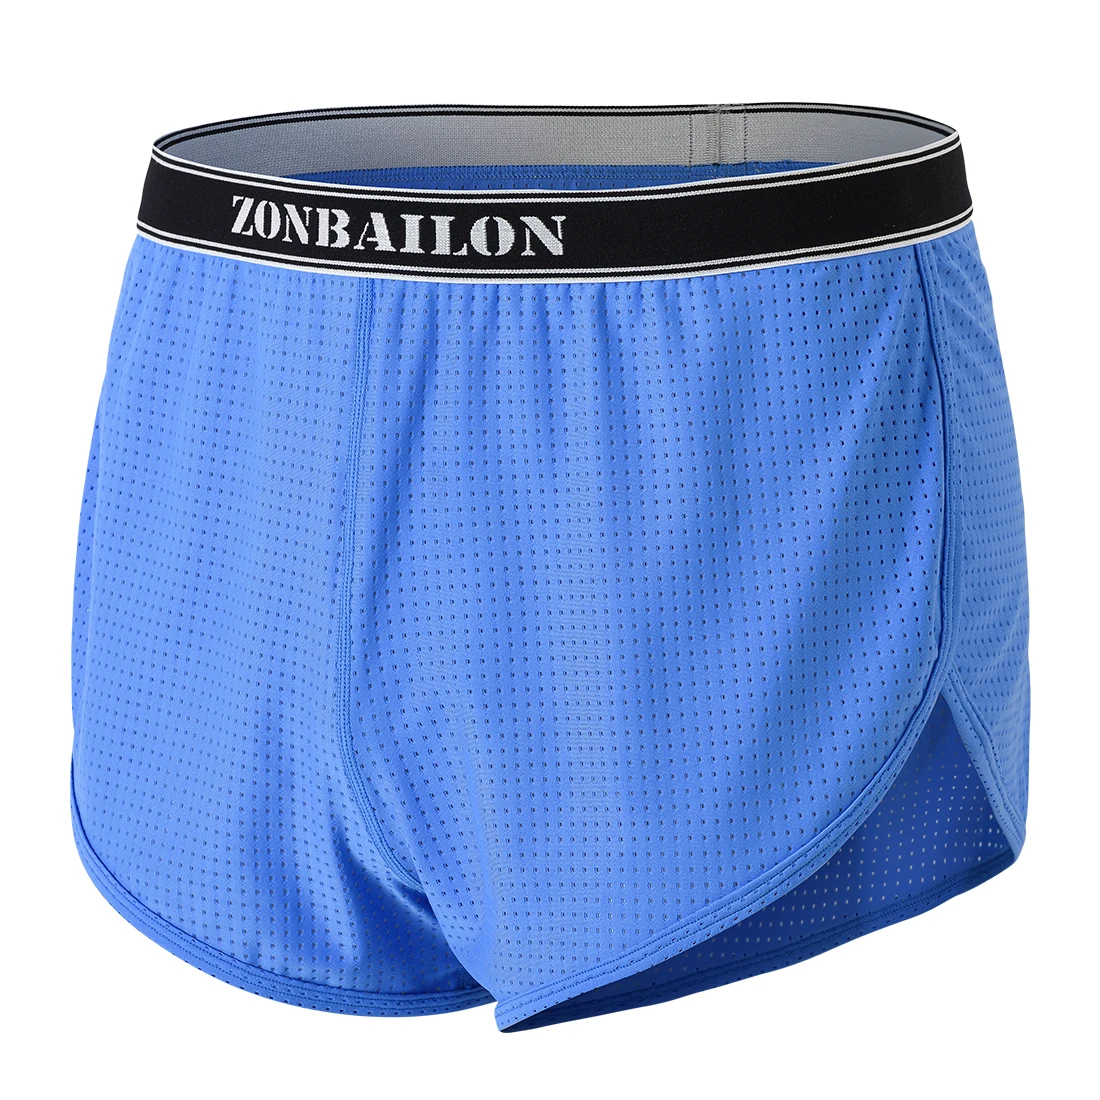 Zonbailon New Men's Boxer Underwear SexyFull Coverage Hip with Low Rise Short Briefs Trunks Style Side Split Boxer Underwear for samsung galaxy z flip4 embroidery style full coverage phone case grey